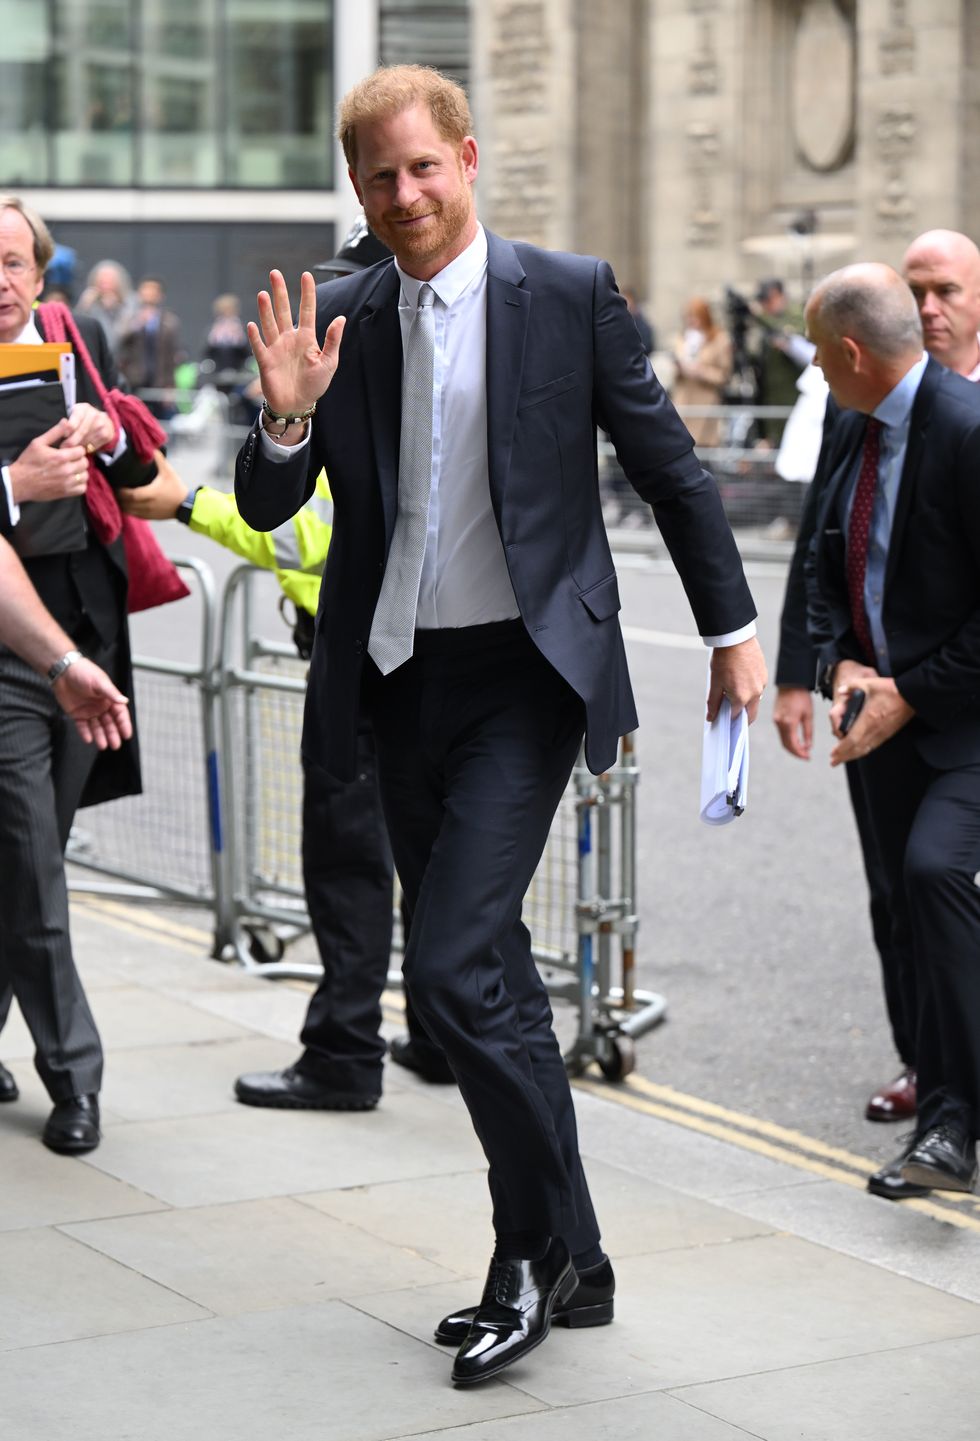 london, england june 07 prince harry, duke of sussex, arrives to give evidence at the mirror group phone hacking trial at the rolls building at high court on june 07, 2023 in london, england prince harry is one of several claimants in a lawsuit against mirror group newspapers related to allegations of unlawful information gathering in previous decades photo by karwai tangwireimage